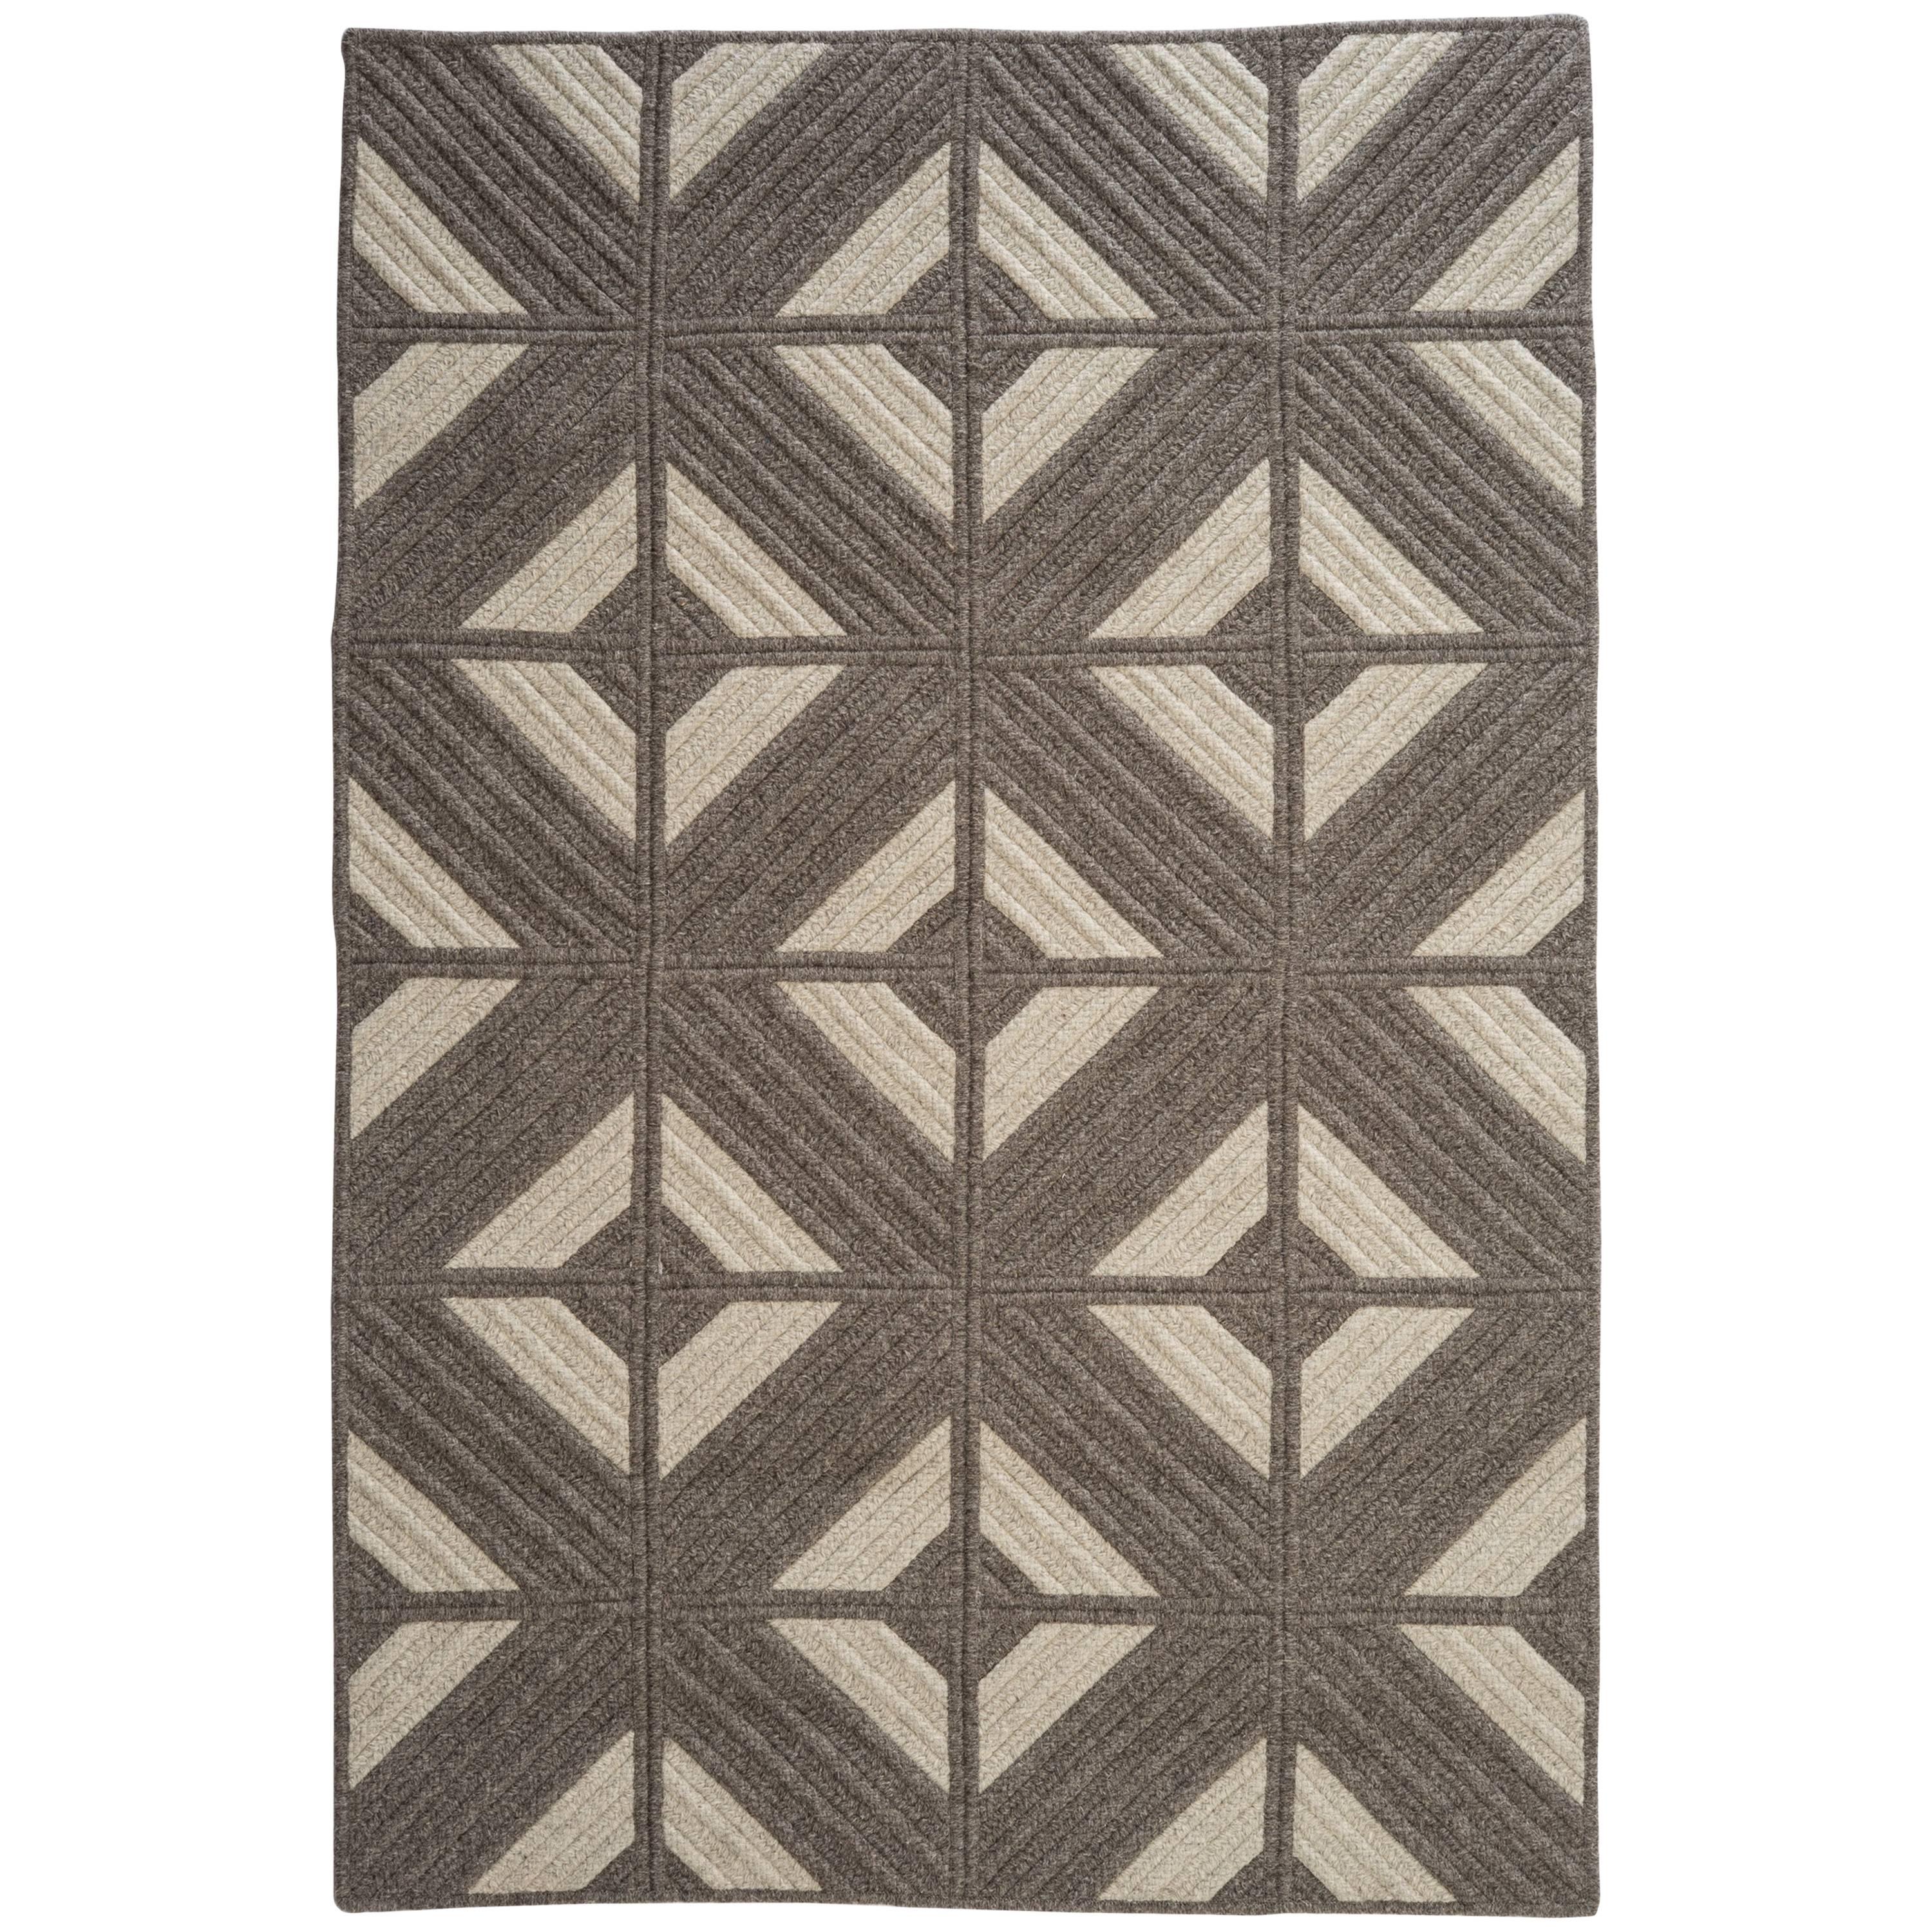 Natural Woven Wool Rug in Dark Grey Custom Crafted in the USA, Reversible, Araz For Sale